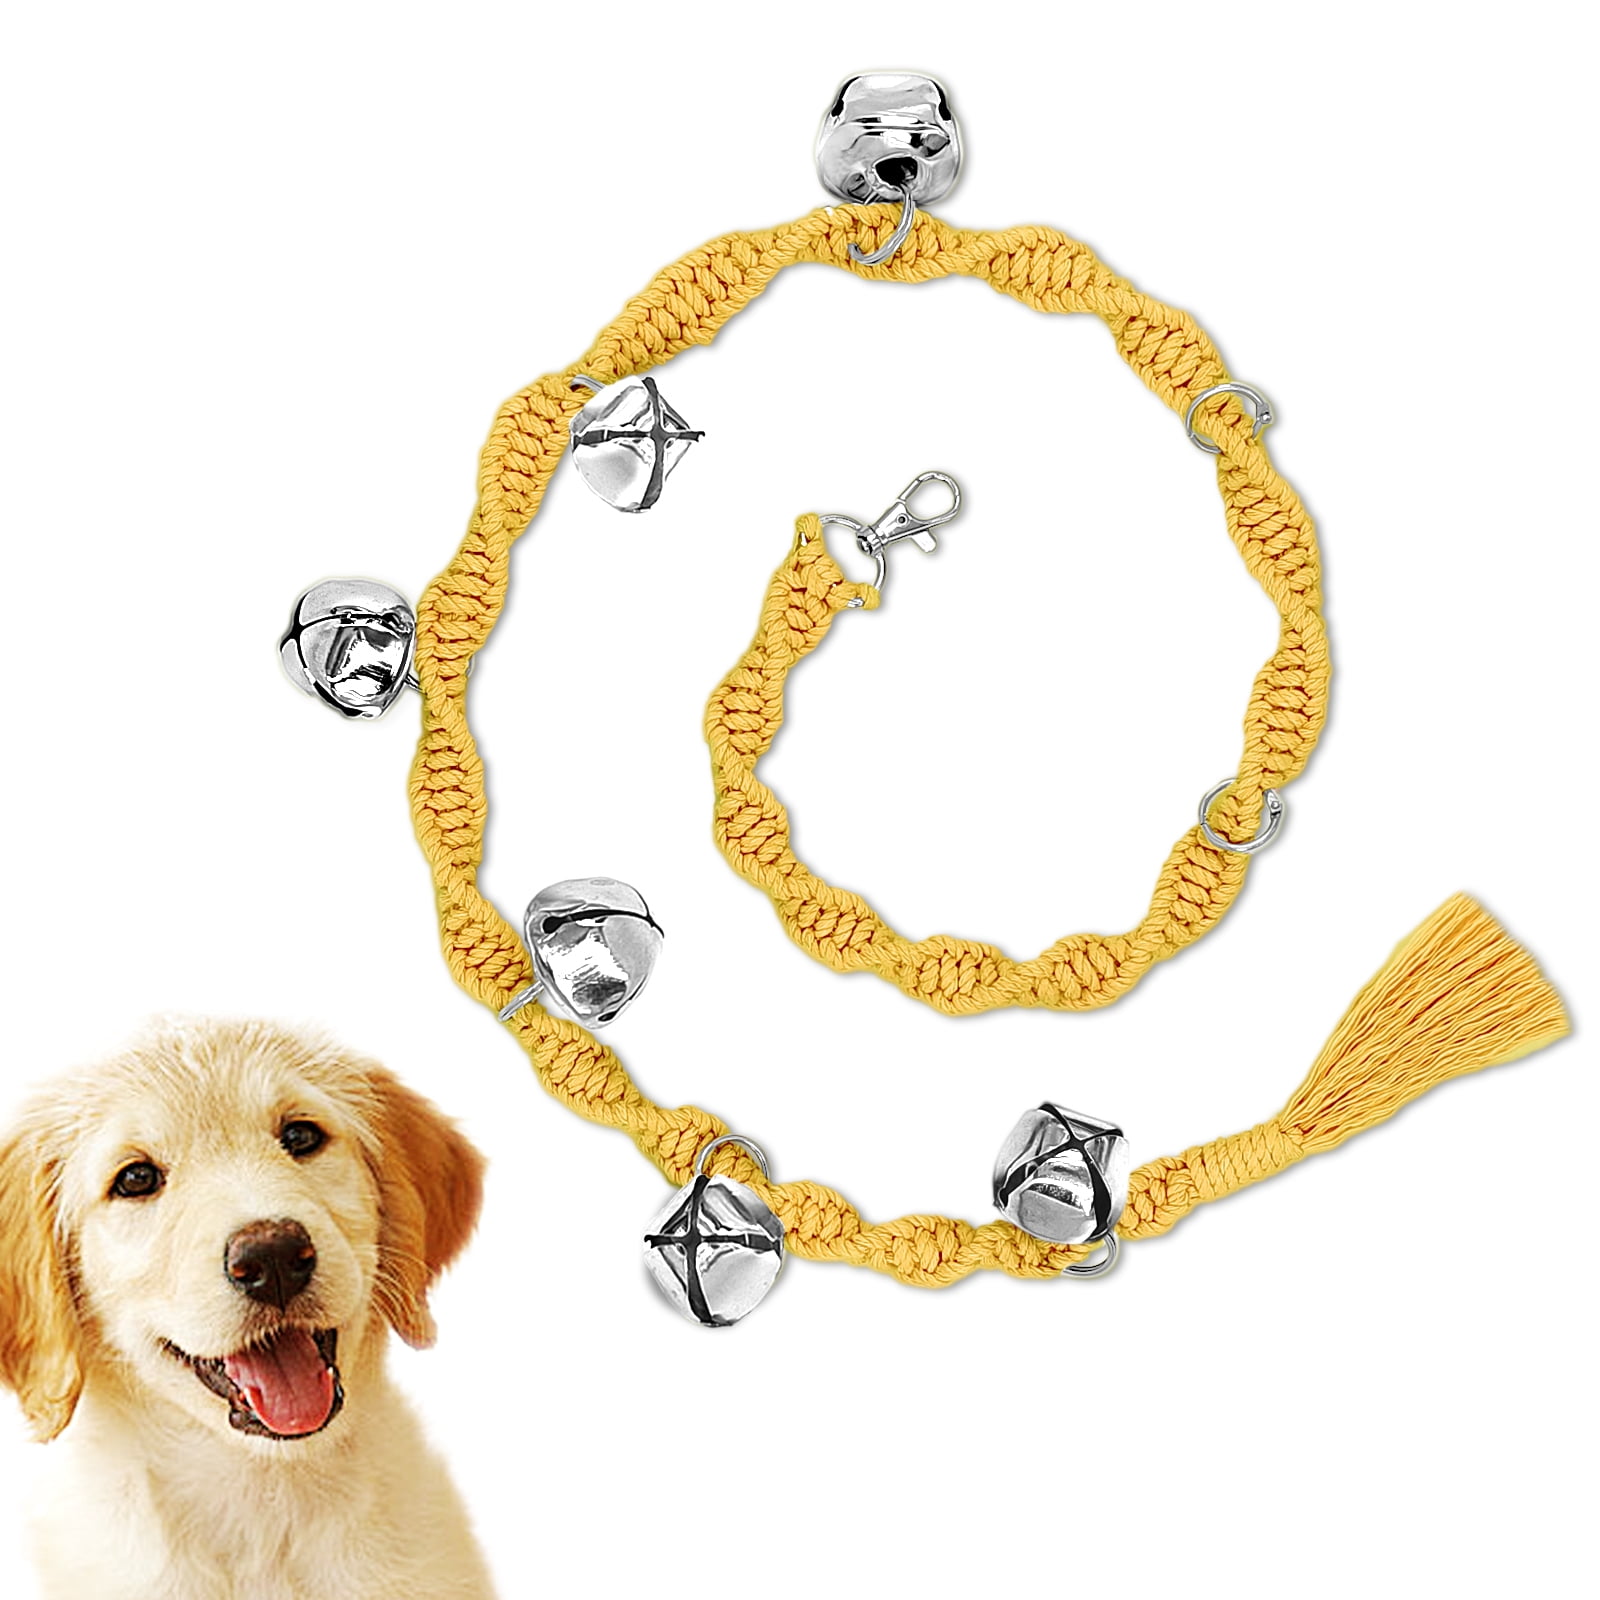 Dog Doorbells for Potty Training, Handmade Hanging Dog Bell for Door Knob  for Puppies to Ring to Go Outside, Macrame Dog Doorbell Gift. Yellow